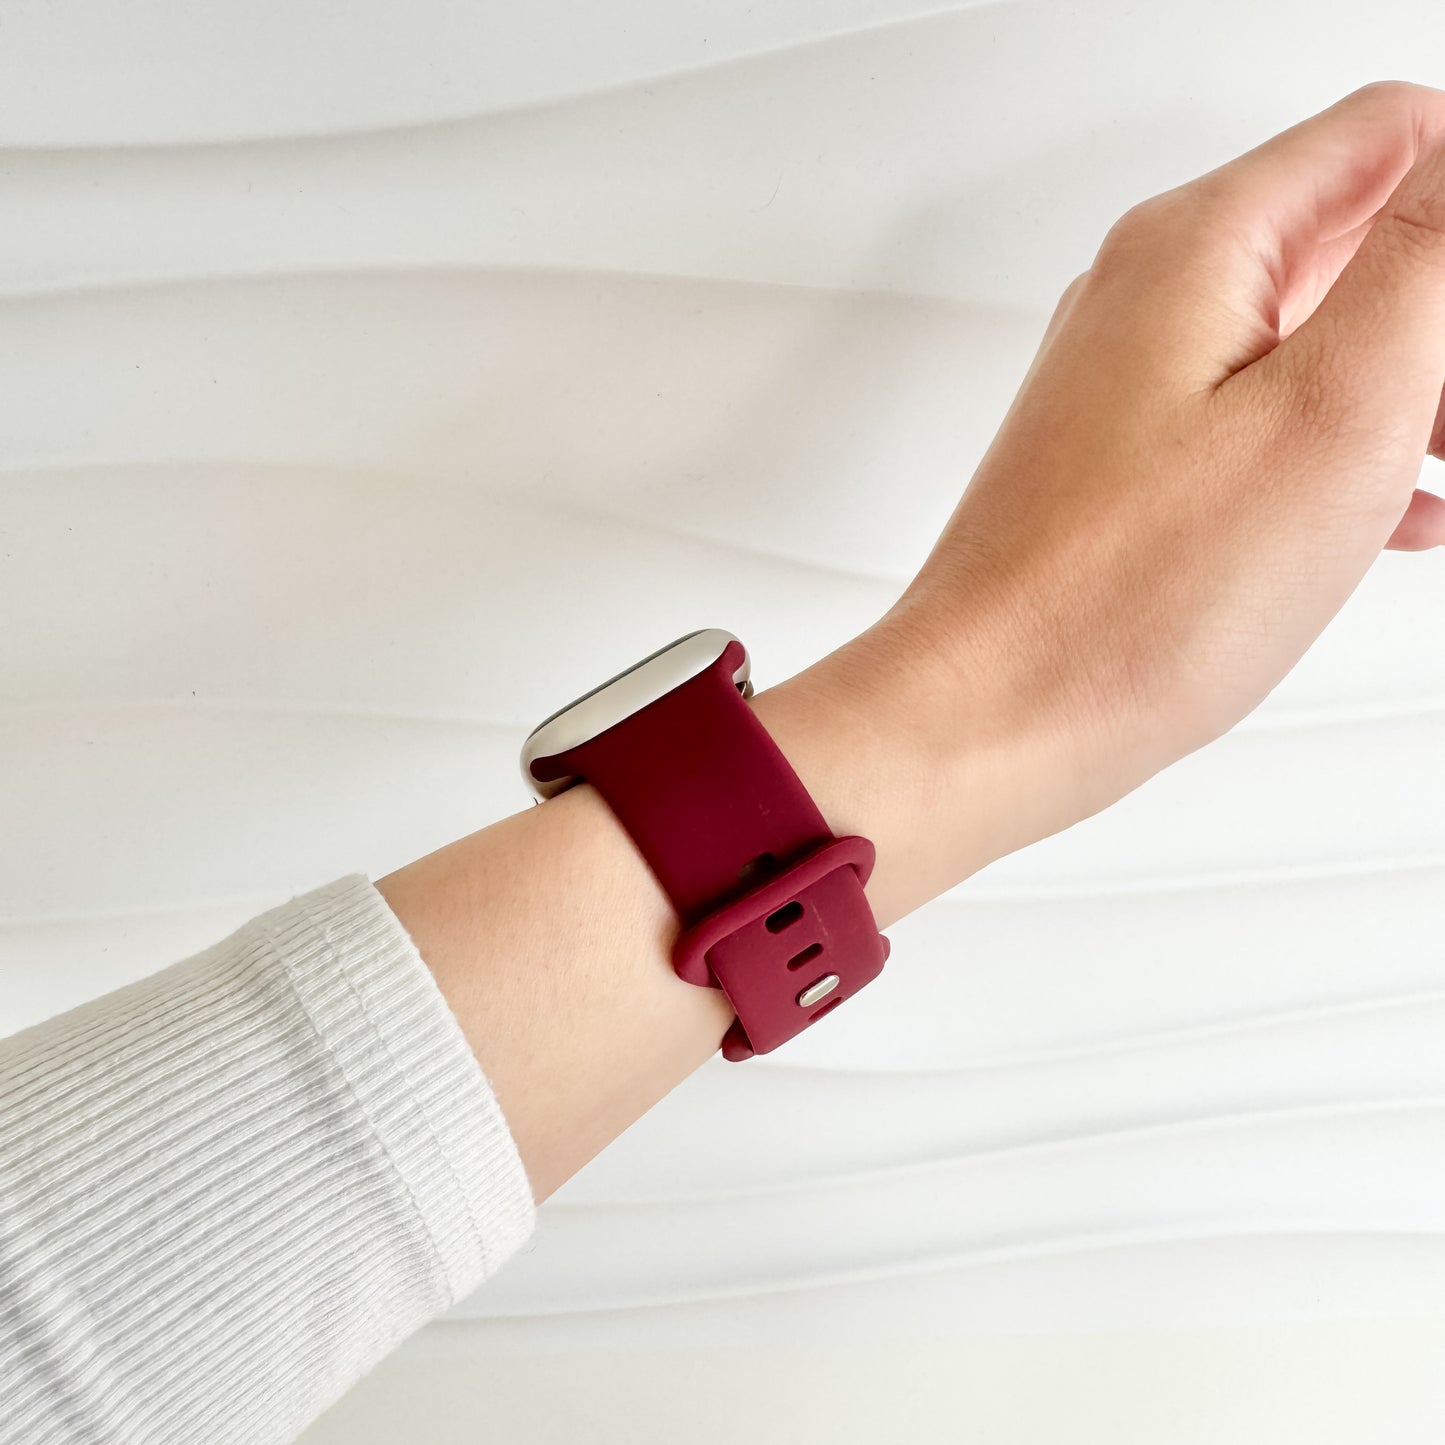 Classic Rubber Knob Apple Watch Band - Wine Red